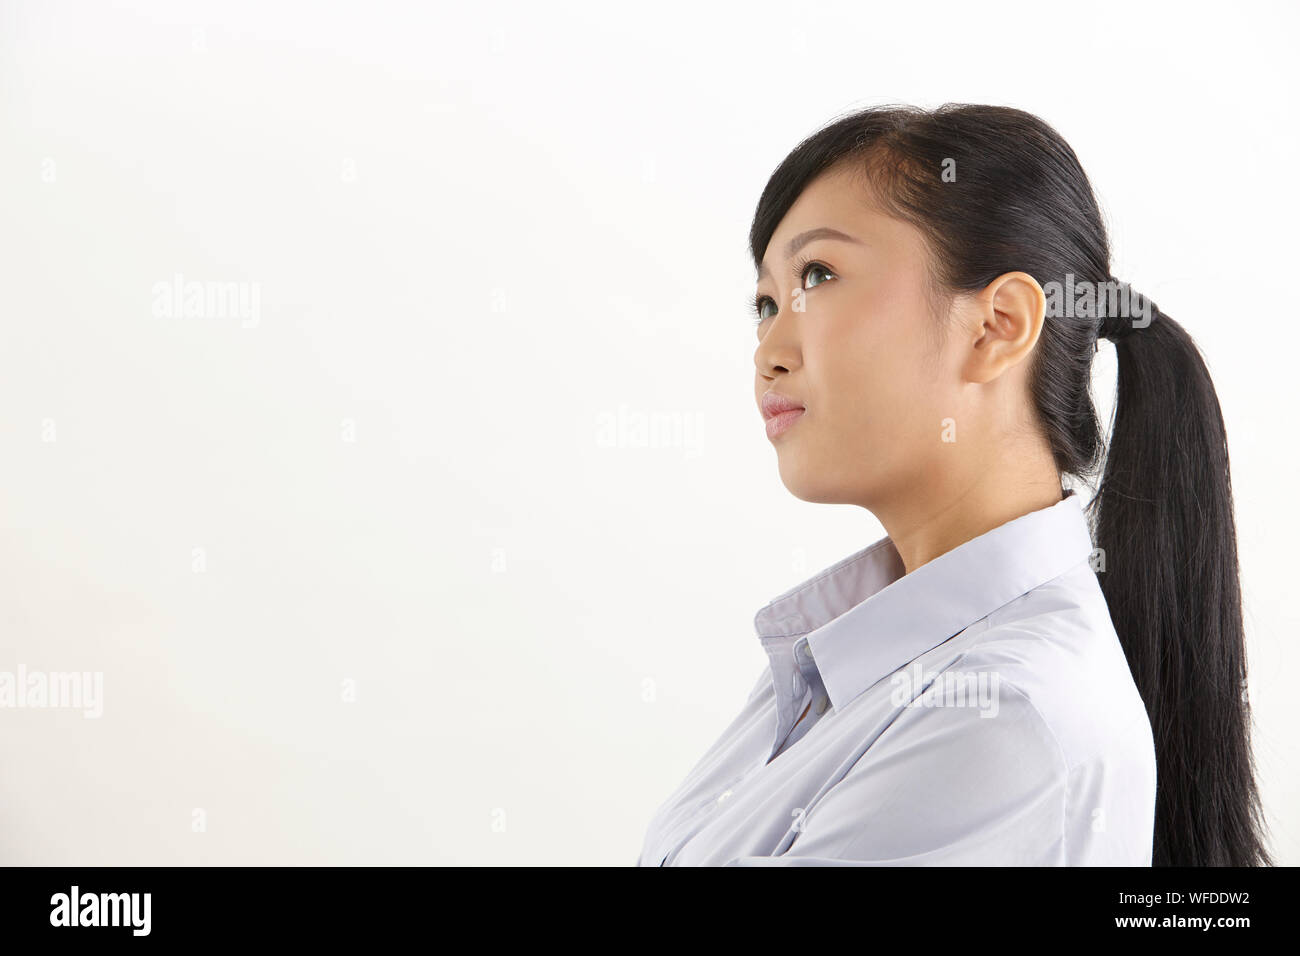 side view of the asian woman on the white background Stock Photo